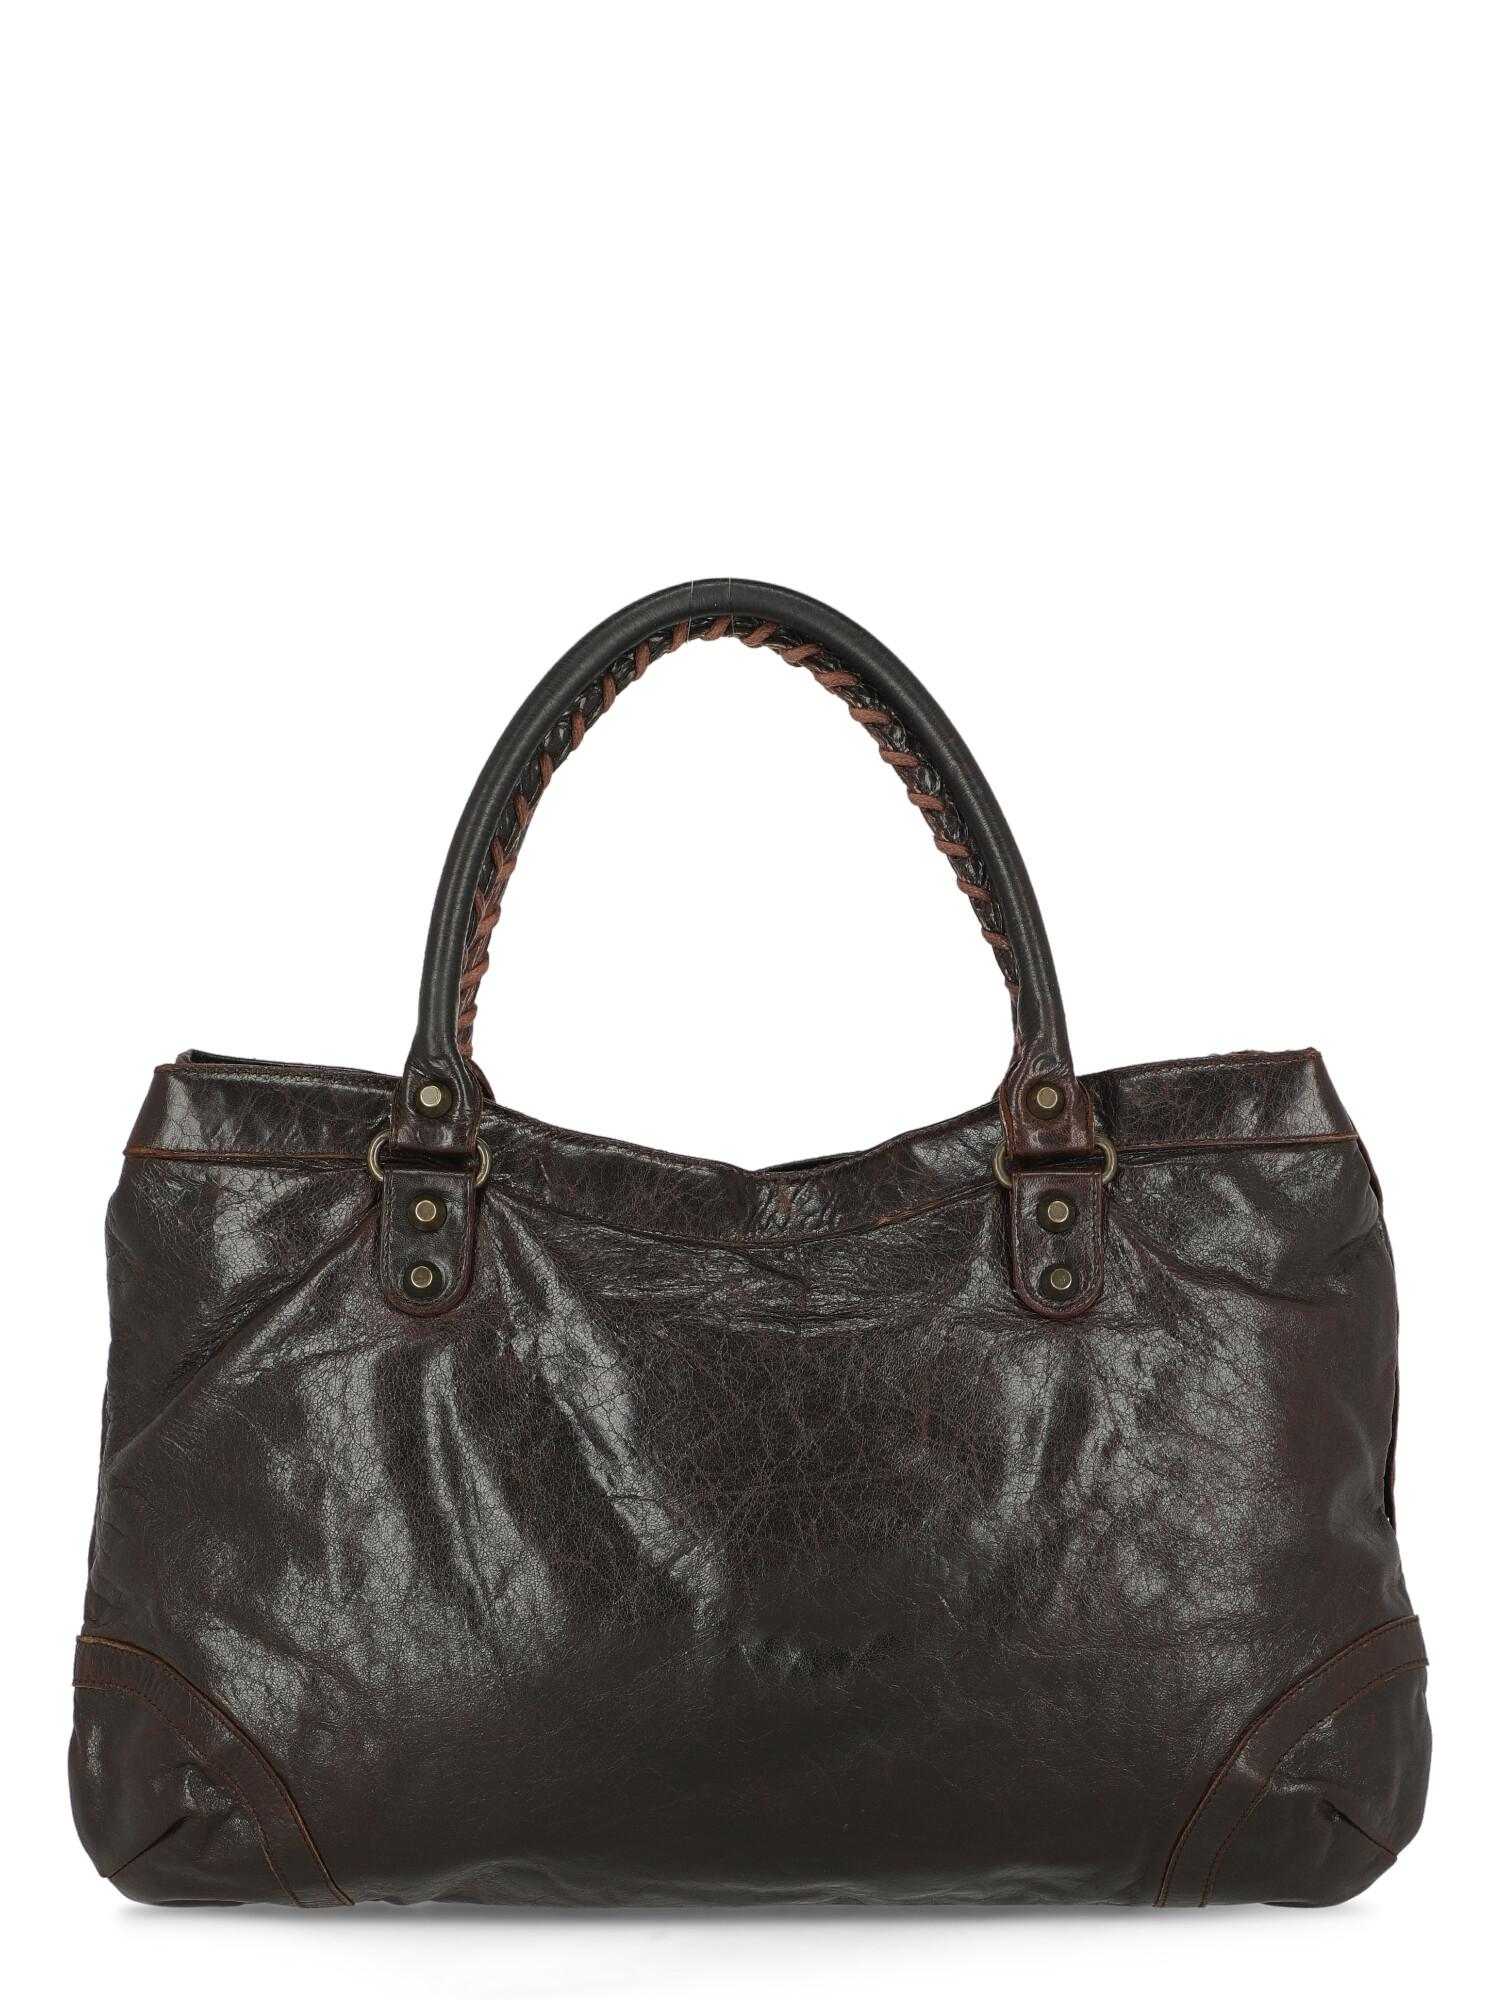 Balenciaga Woman Shoulder bag Brown Leather In Good Condition For Sale In Milan, IT